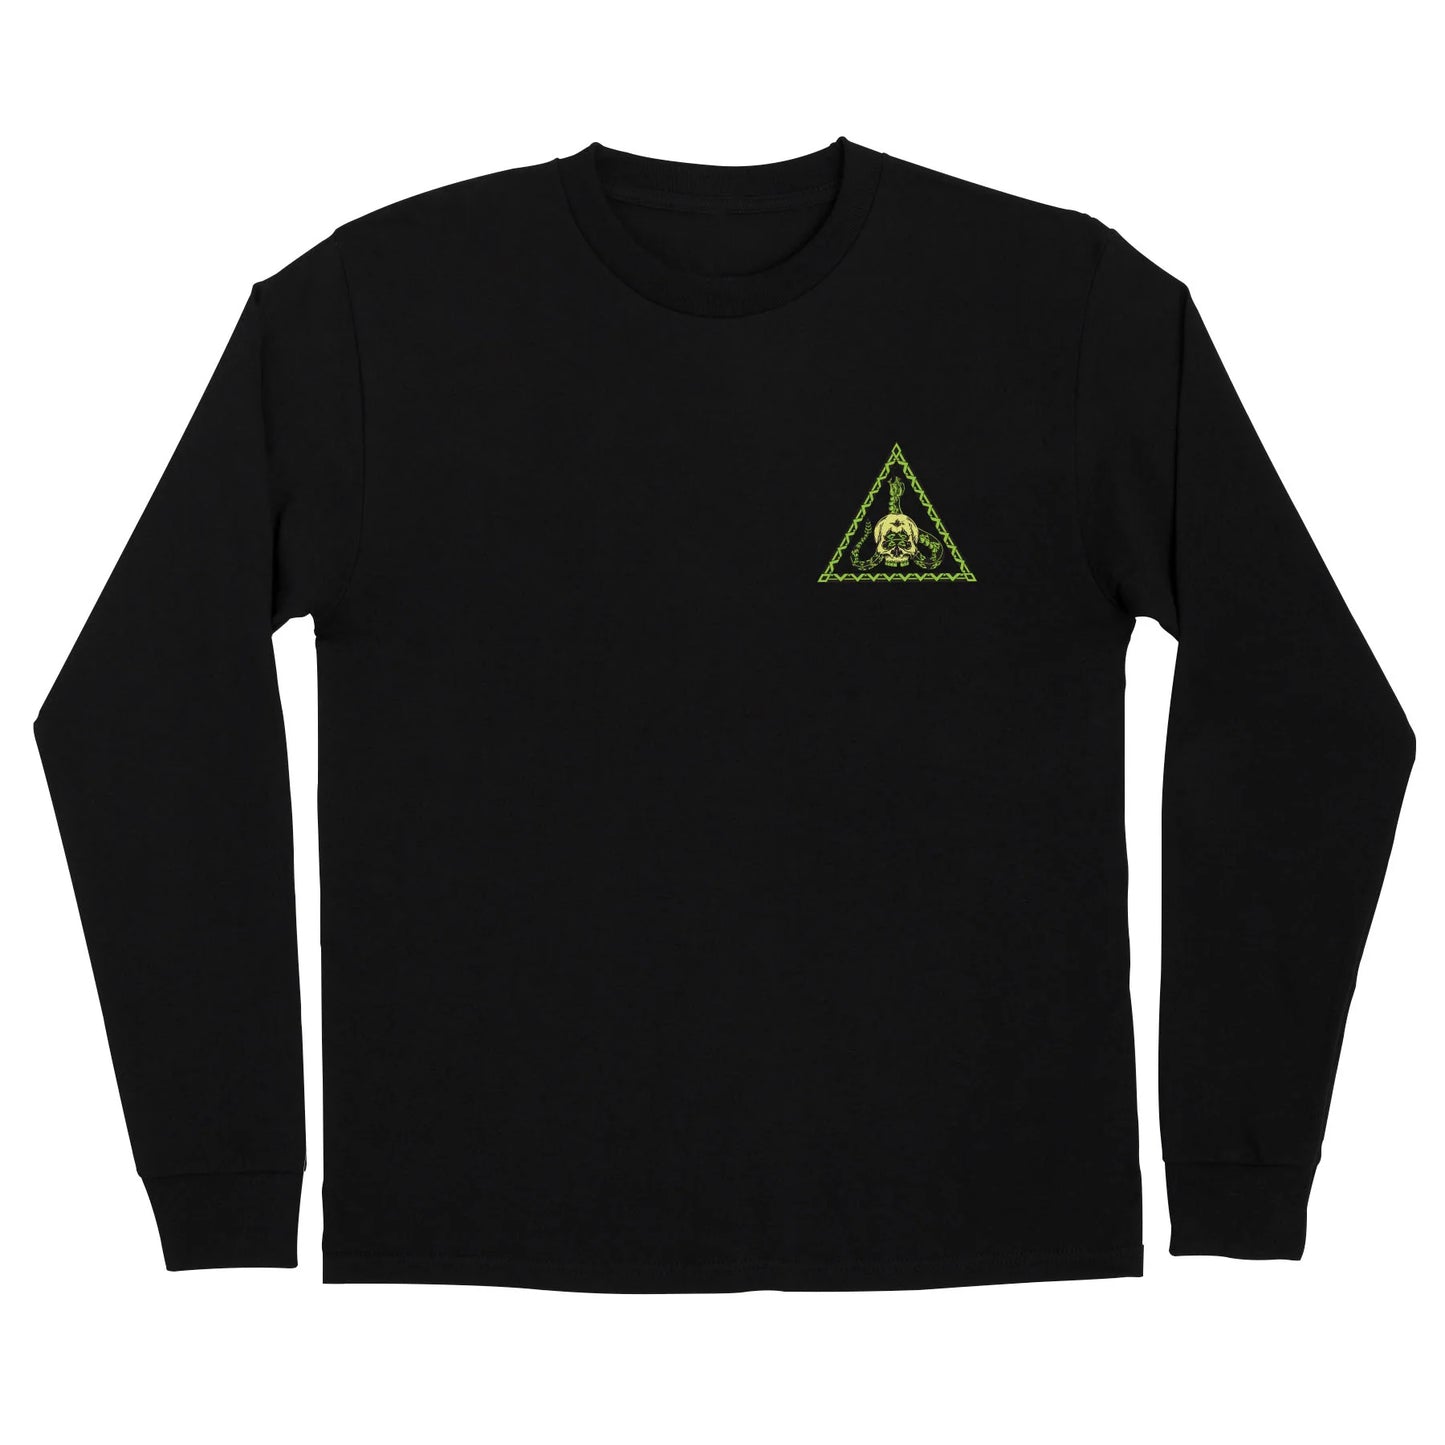 Take Warning L/S Premium Tee Shirt Eco Blk(size options listed)